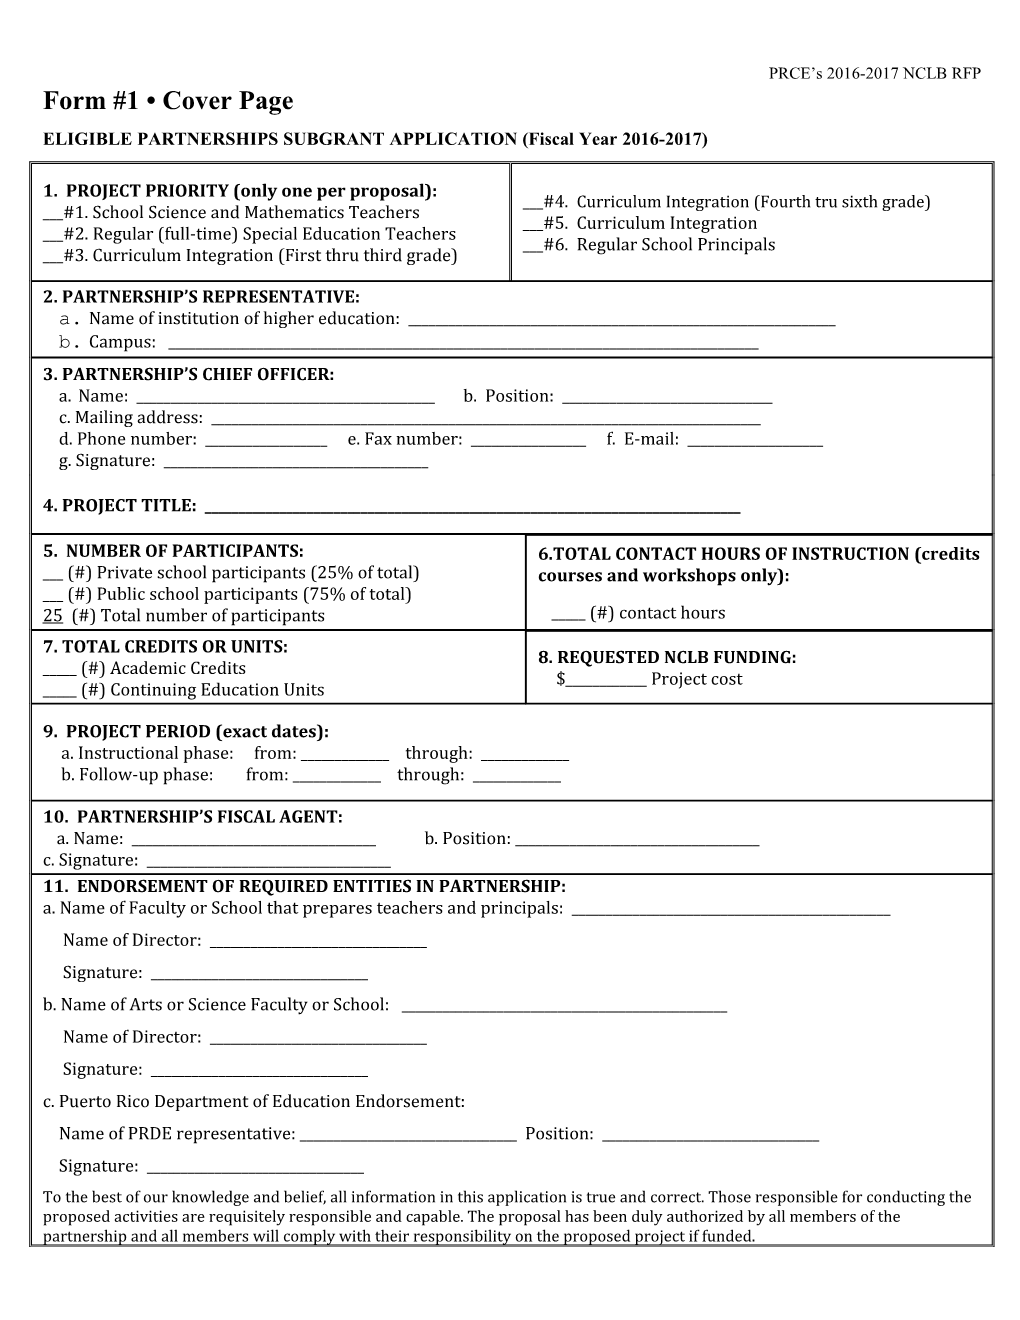 Form 1 Cover Page